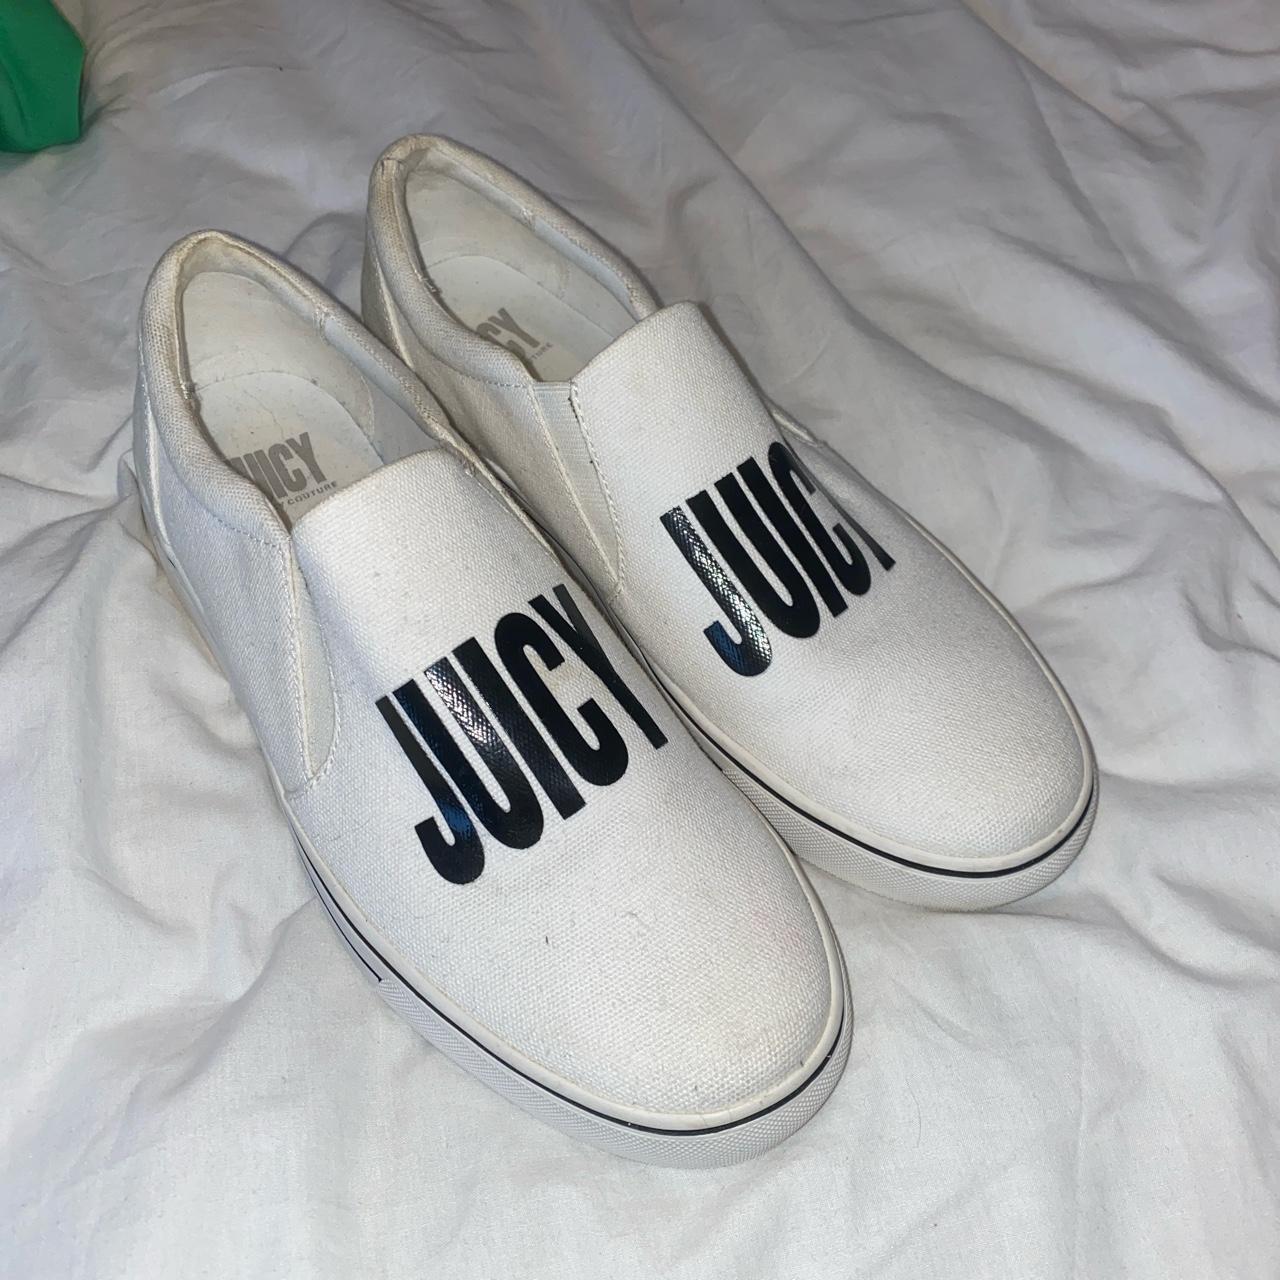 Juicy Couture Women's Loafers | Depop